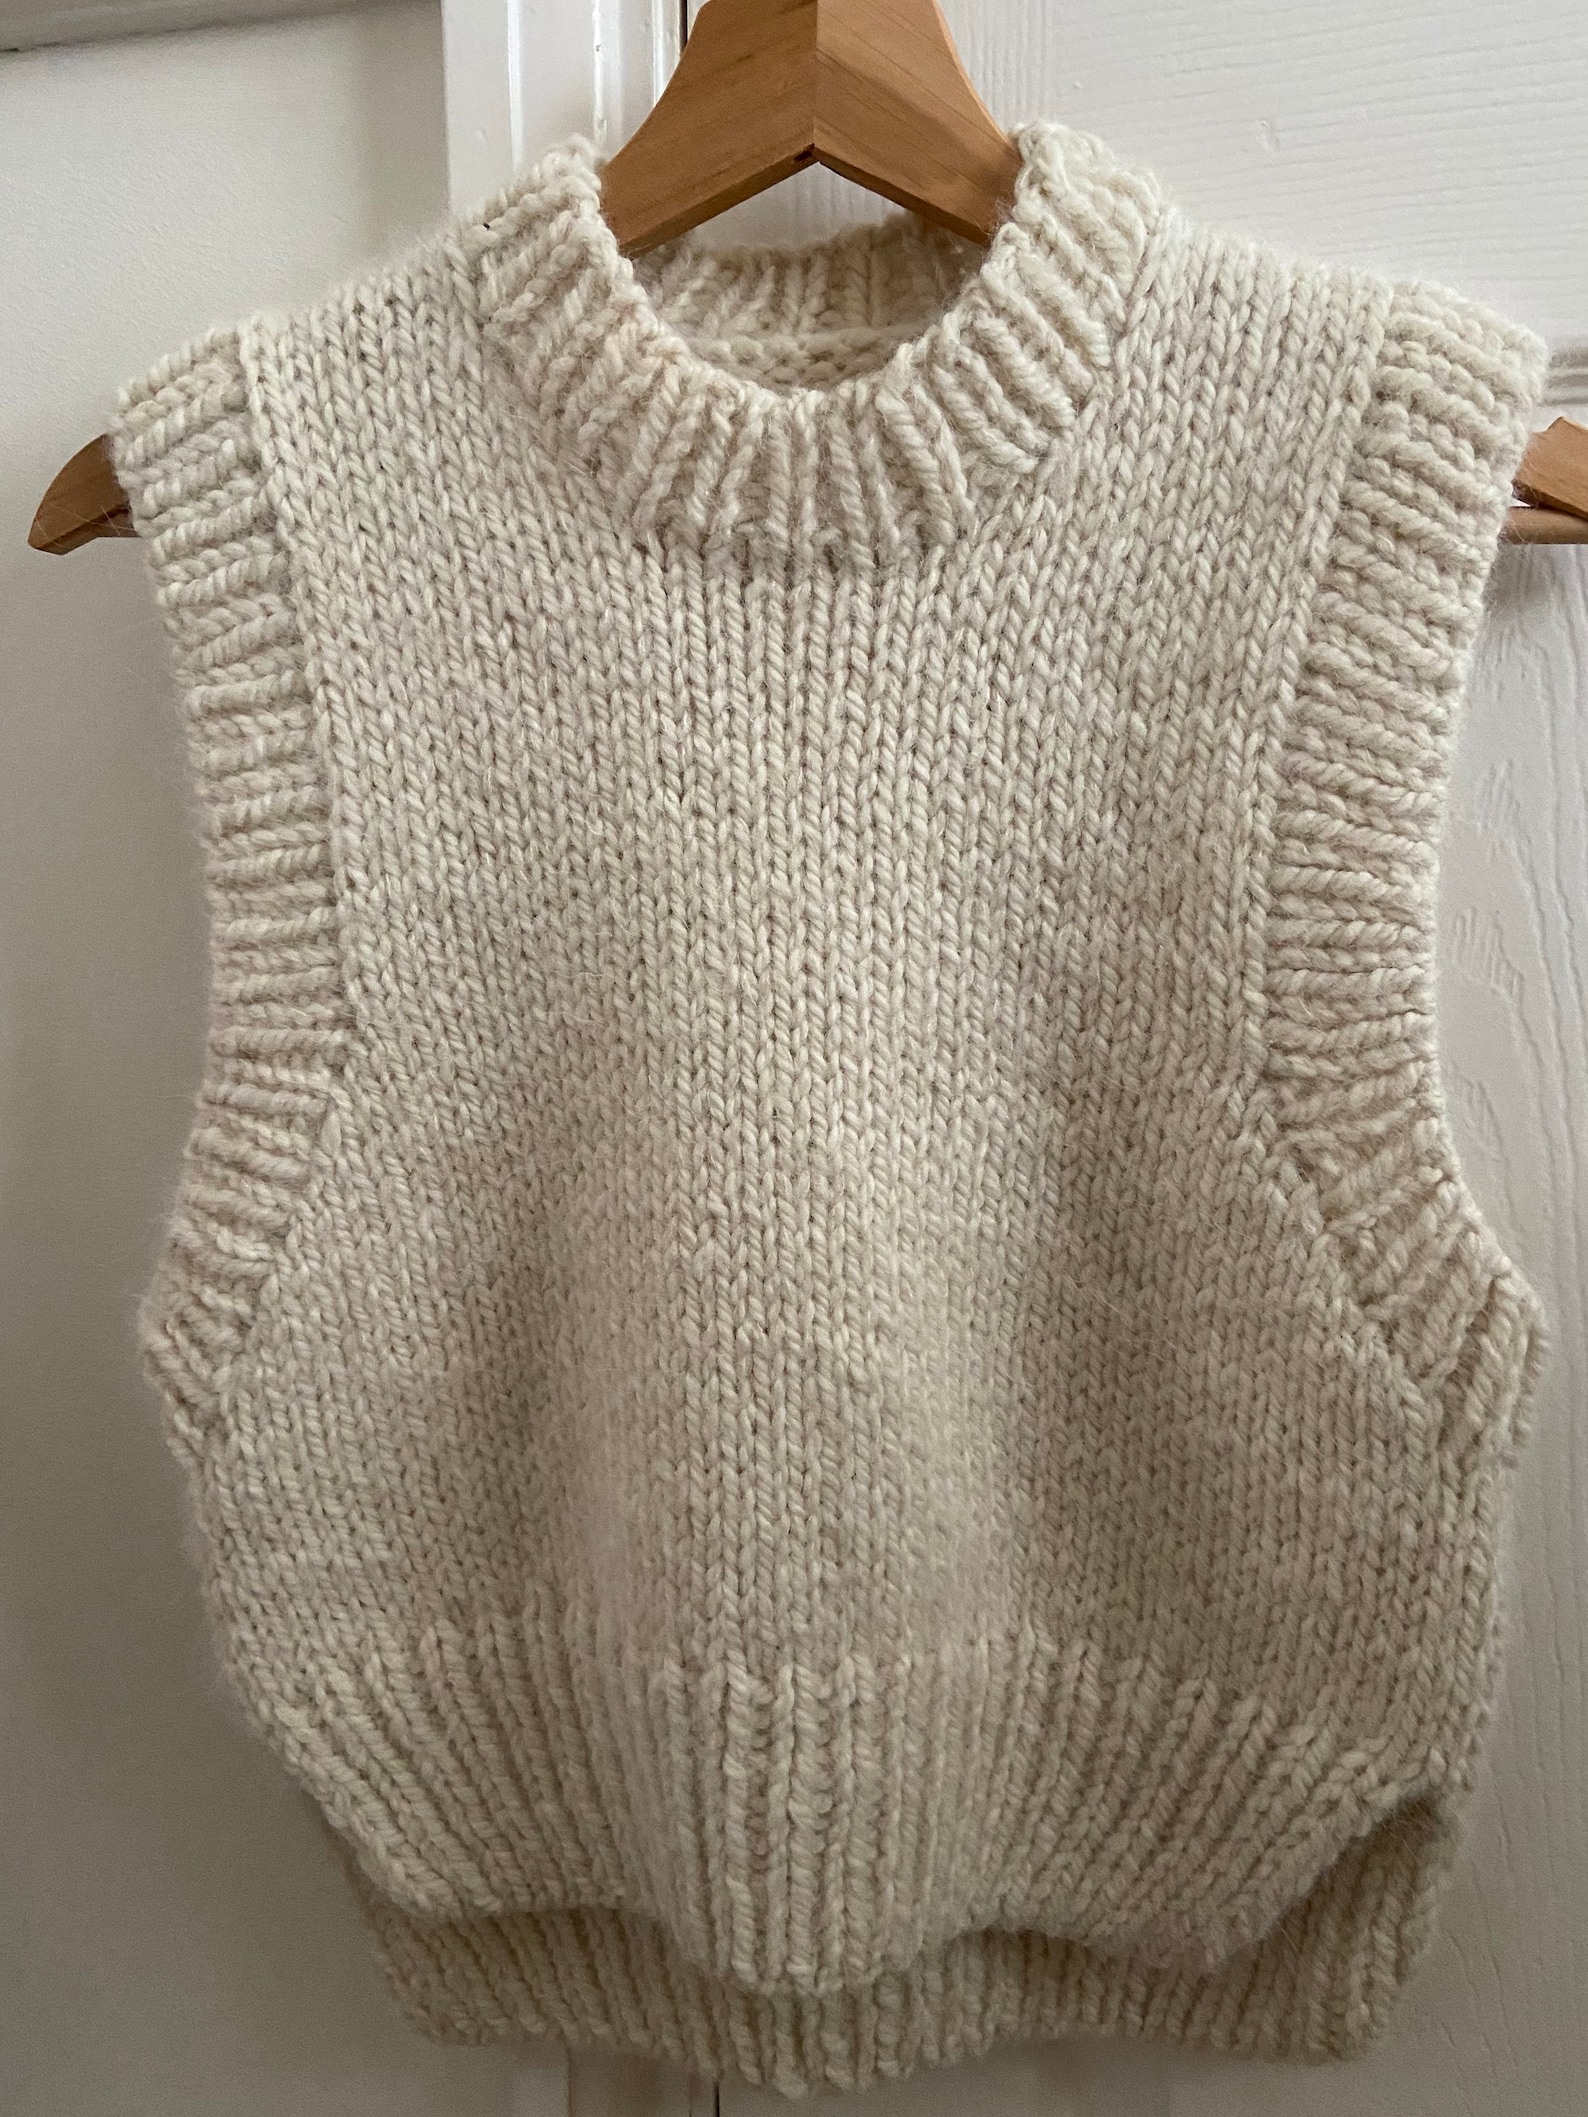 Hand Knitted Sweater Vest - Etsy